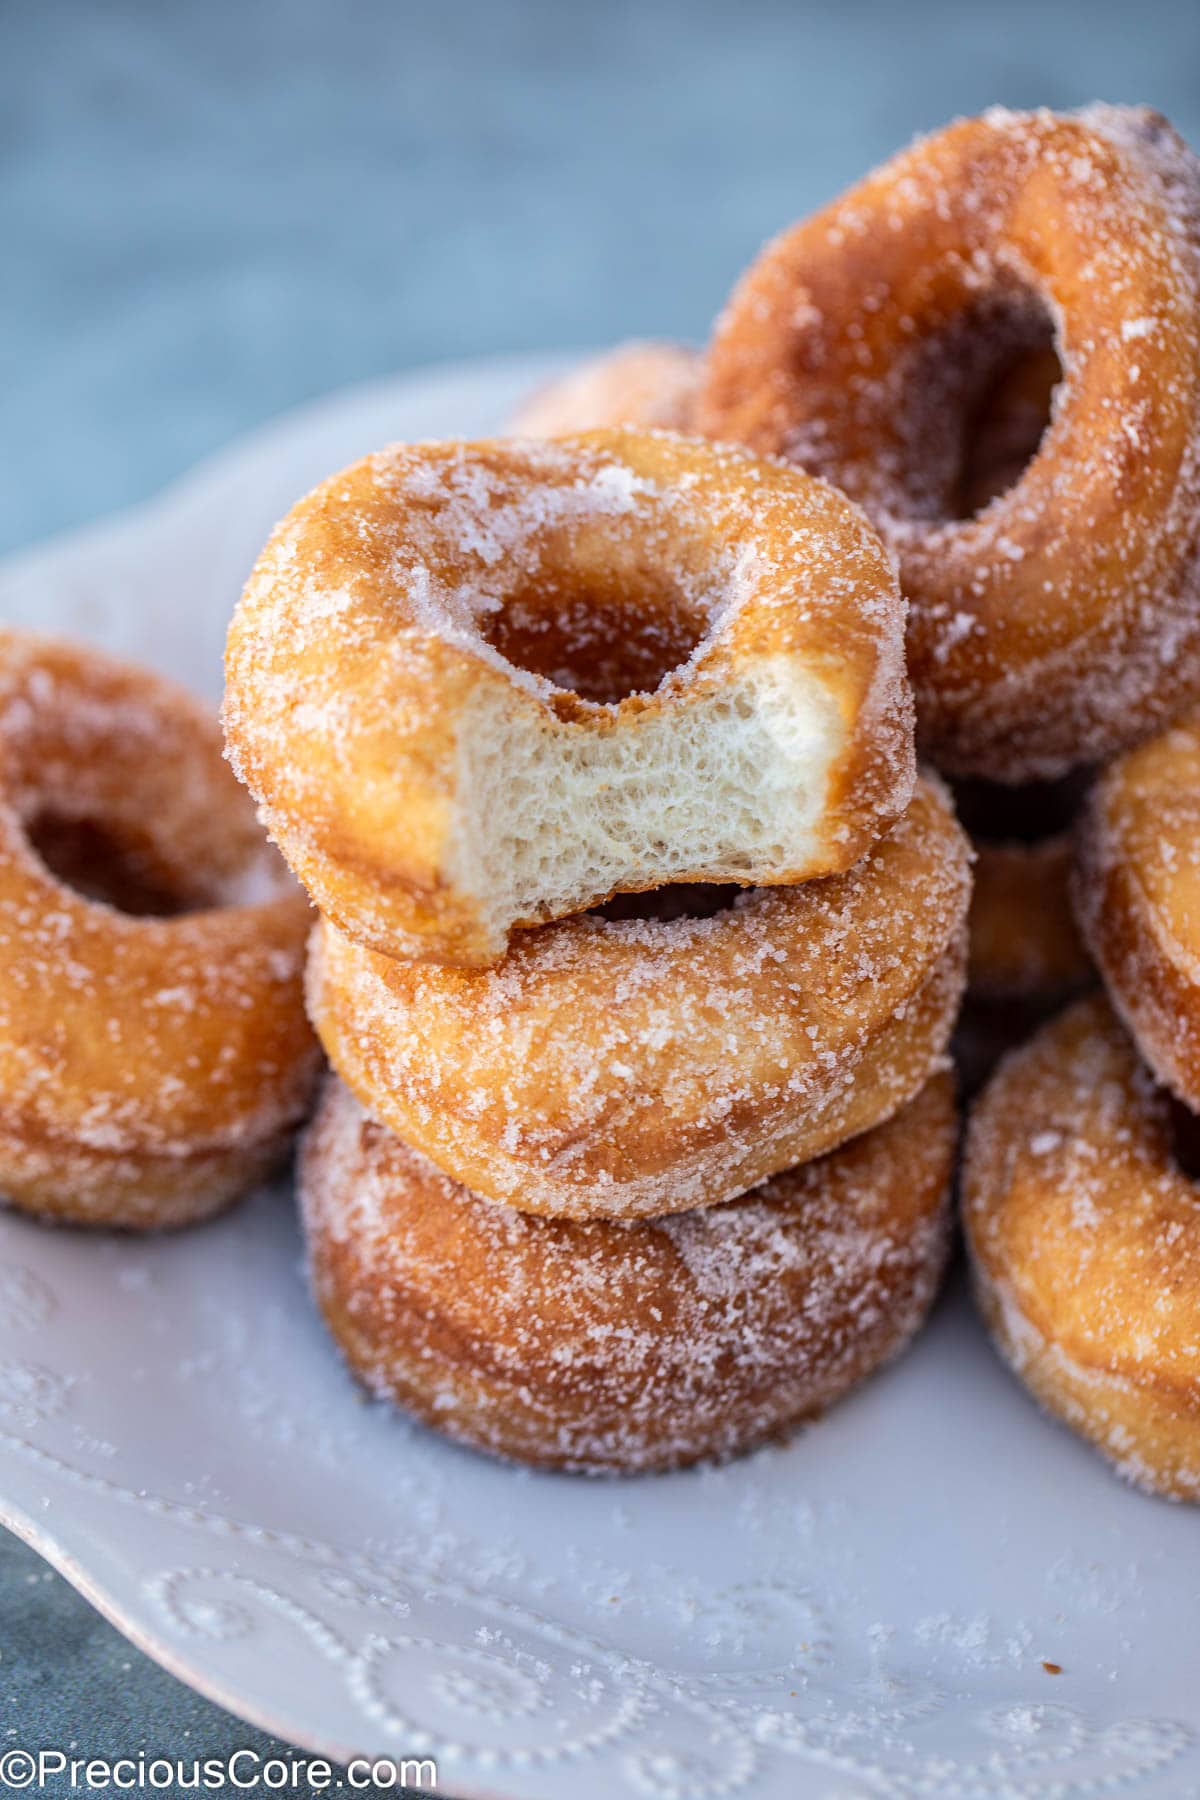 Stack of doughnuts with one missing a bite.